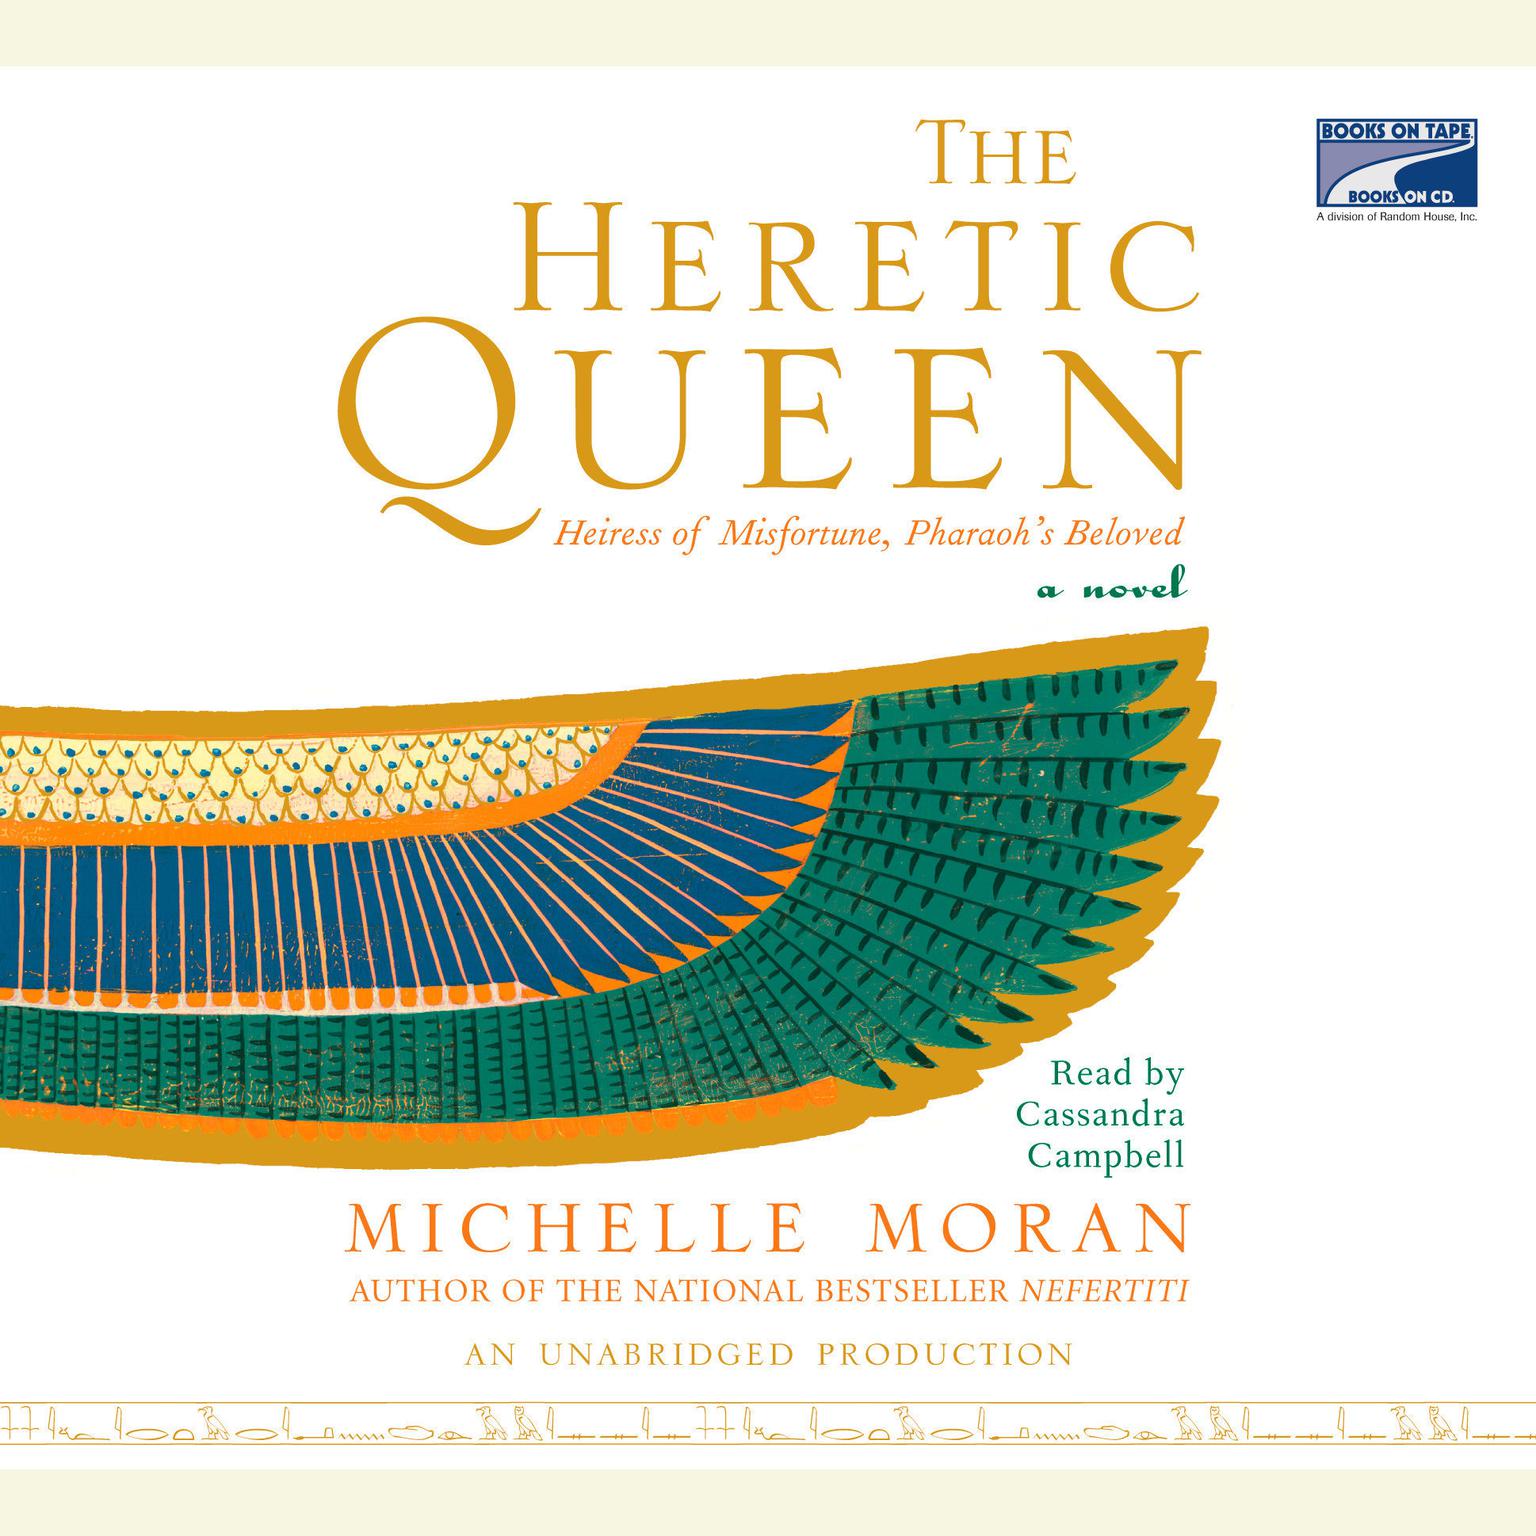 The Heretic Queen: A Novel Audiobook, by Michelle Moran